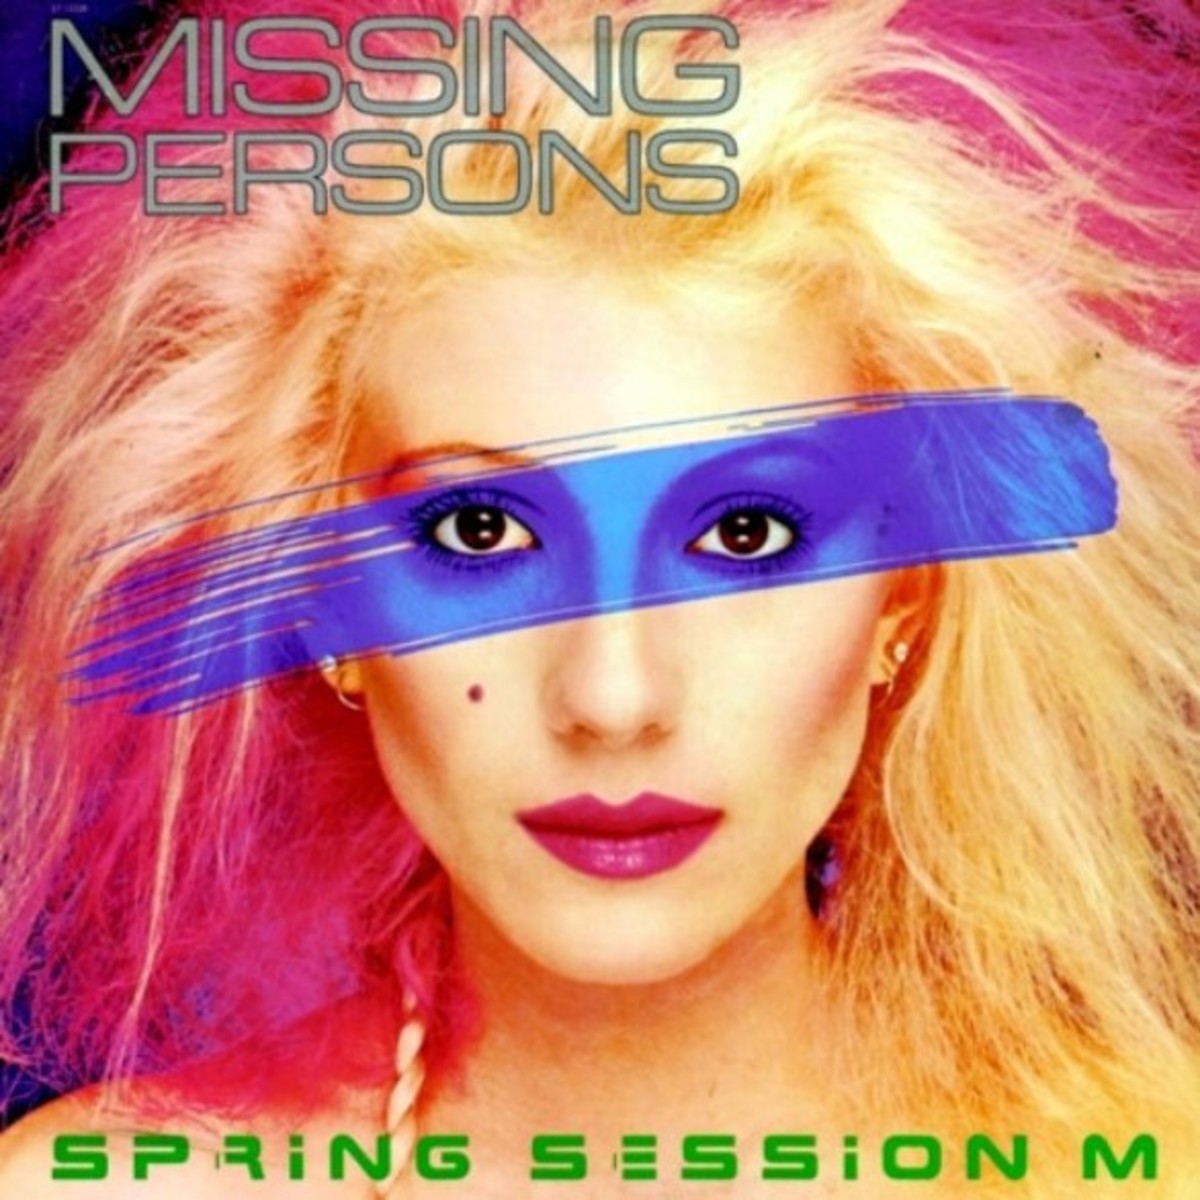 Missing Persons Spring Session M